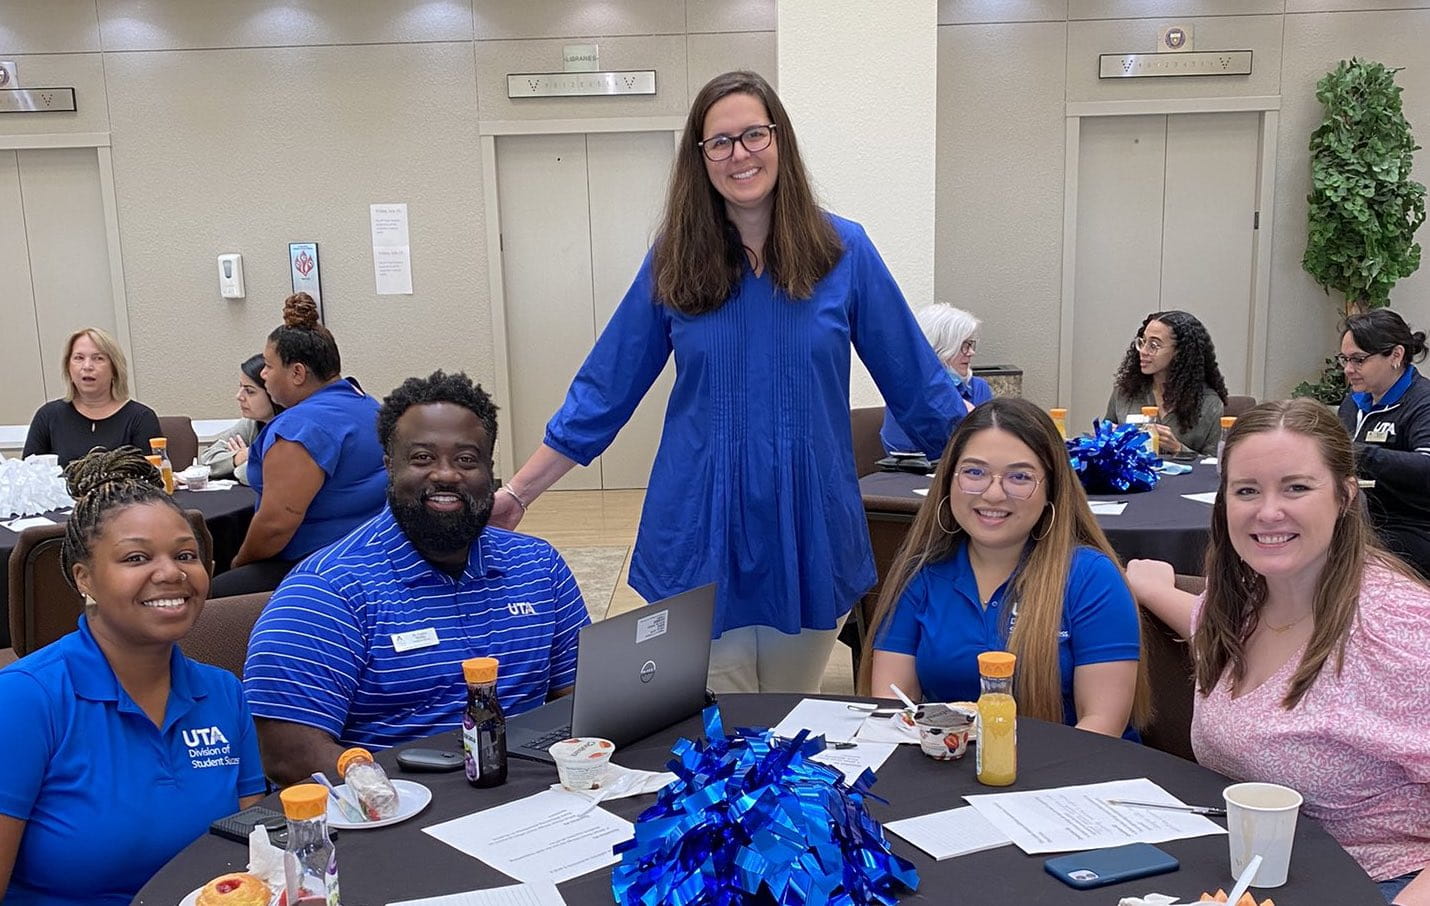 president cowley at a breakfast table with UTA's student success team